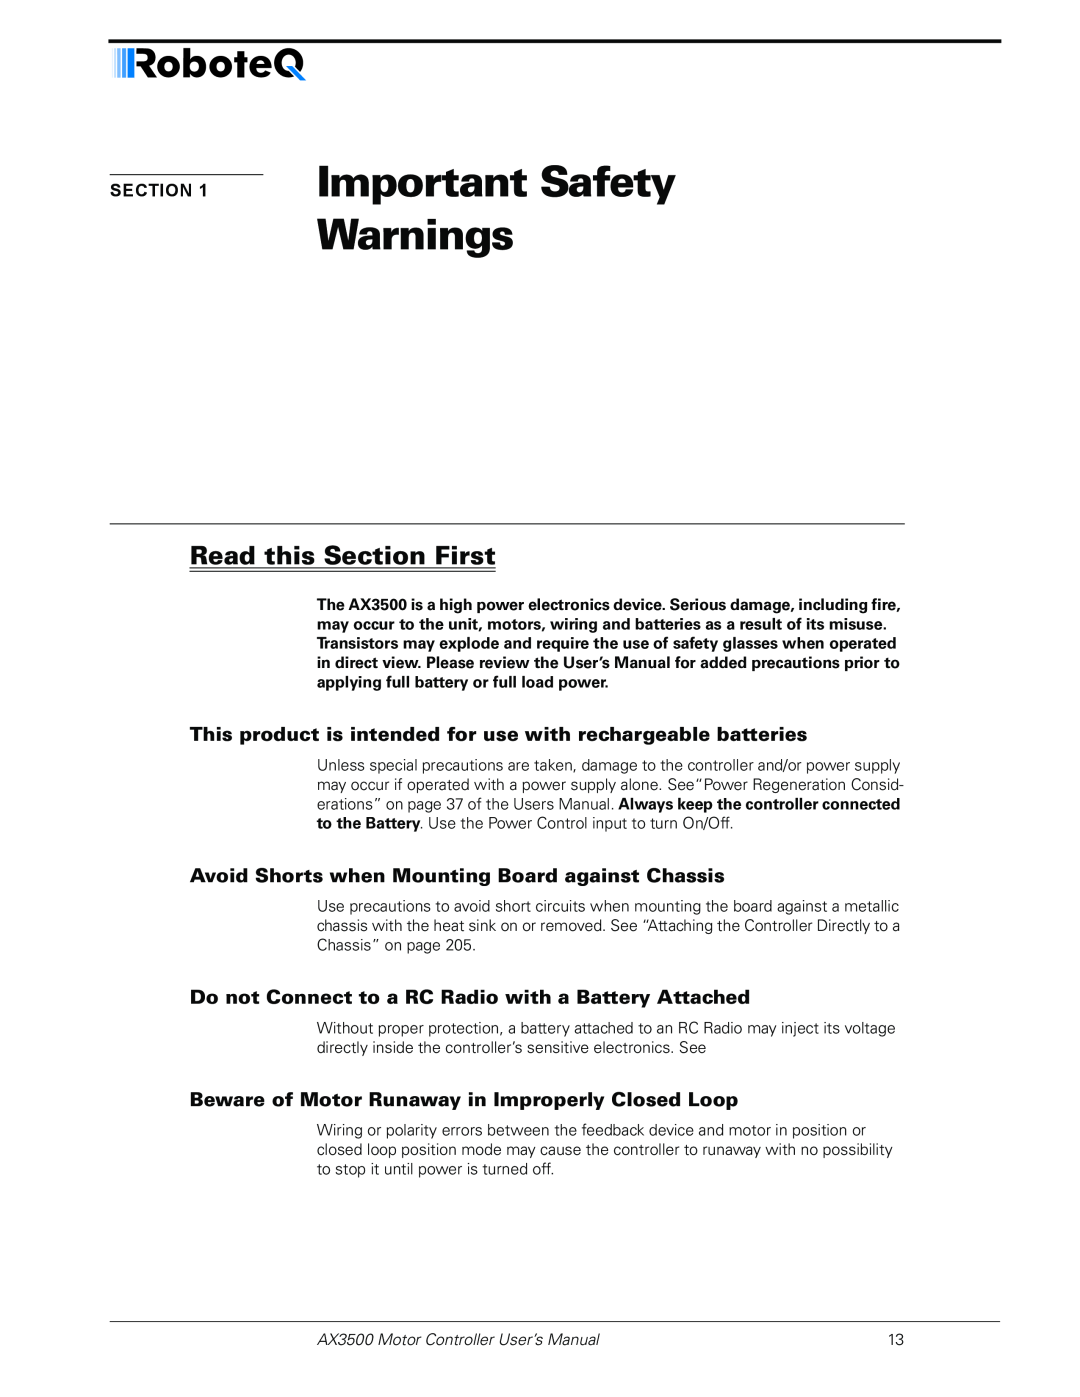 RoboteQ AX3500 Important Safety, Warnings, Read this Section First, Avoid Shorts when Mounting Board against Chassis 